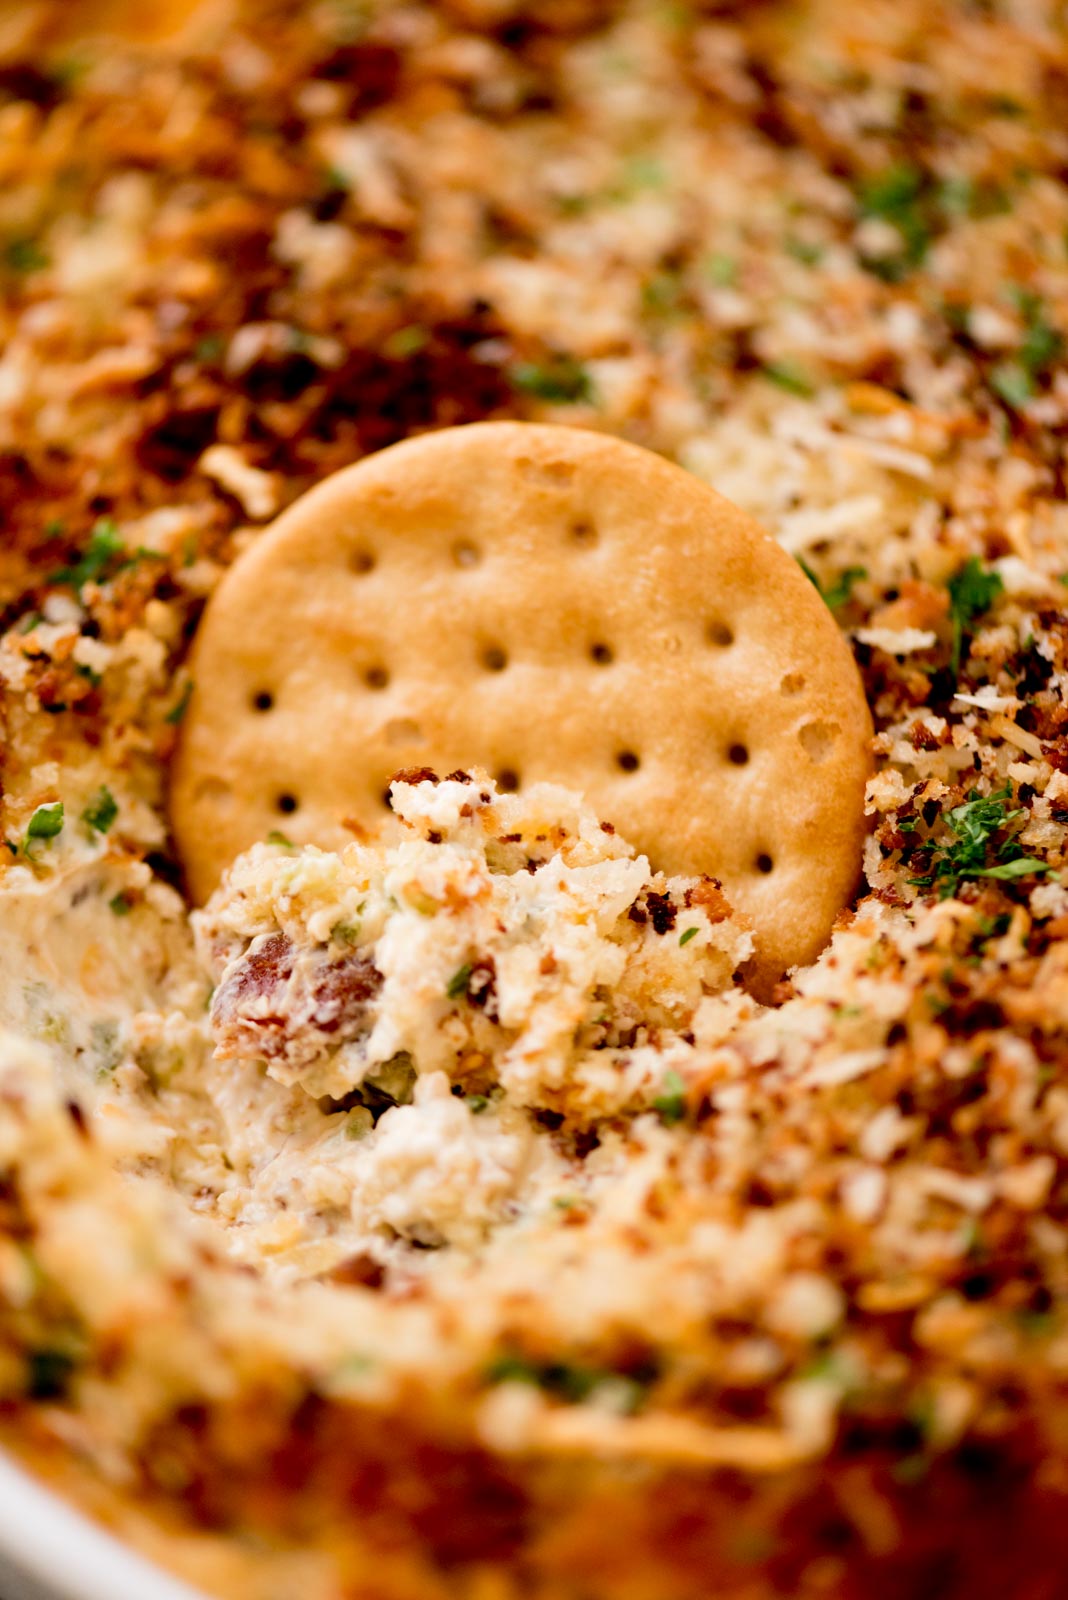 jalapeno popper dip being scooped with a cracker